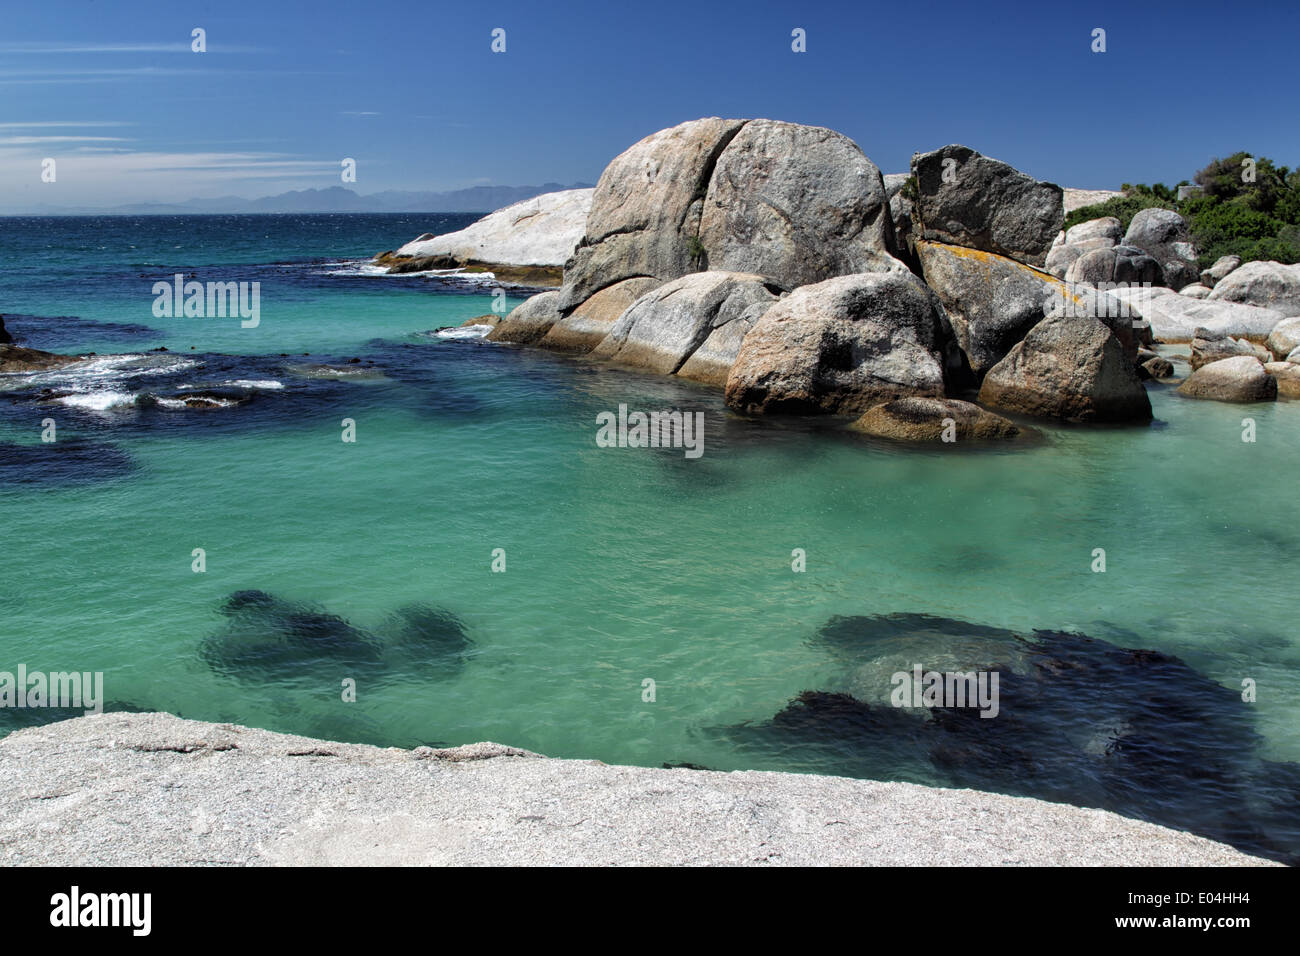 Boulders Beach with huge rocks in the water at Simons Town on the Cape Peninsula near Cape Town, South Africa. Stock Photo